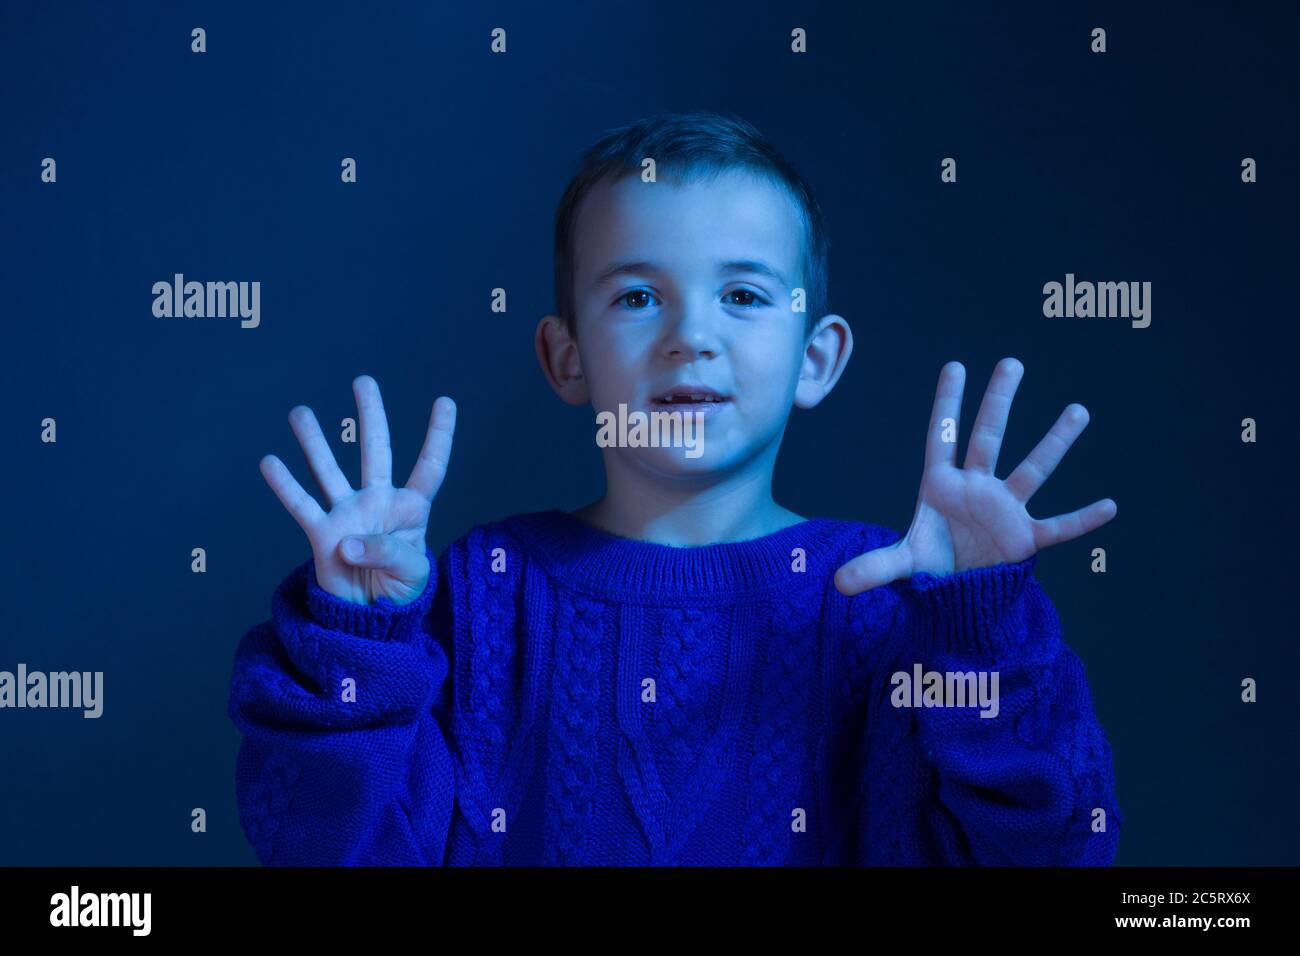 Studio portrait of a brunette Boy who counts on his fingers, shows nine finger, toning in a classic blue color. Stock Photo